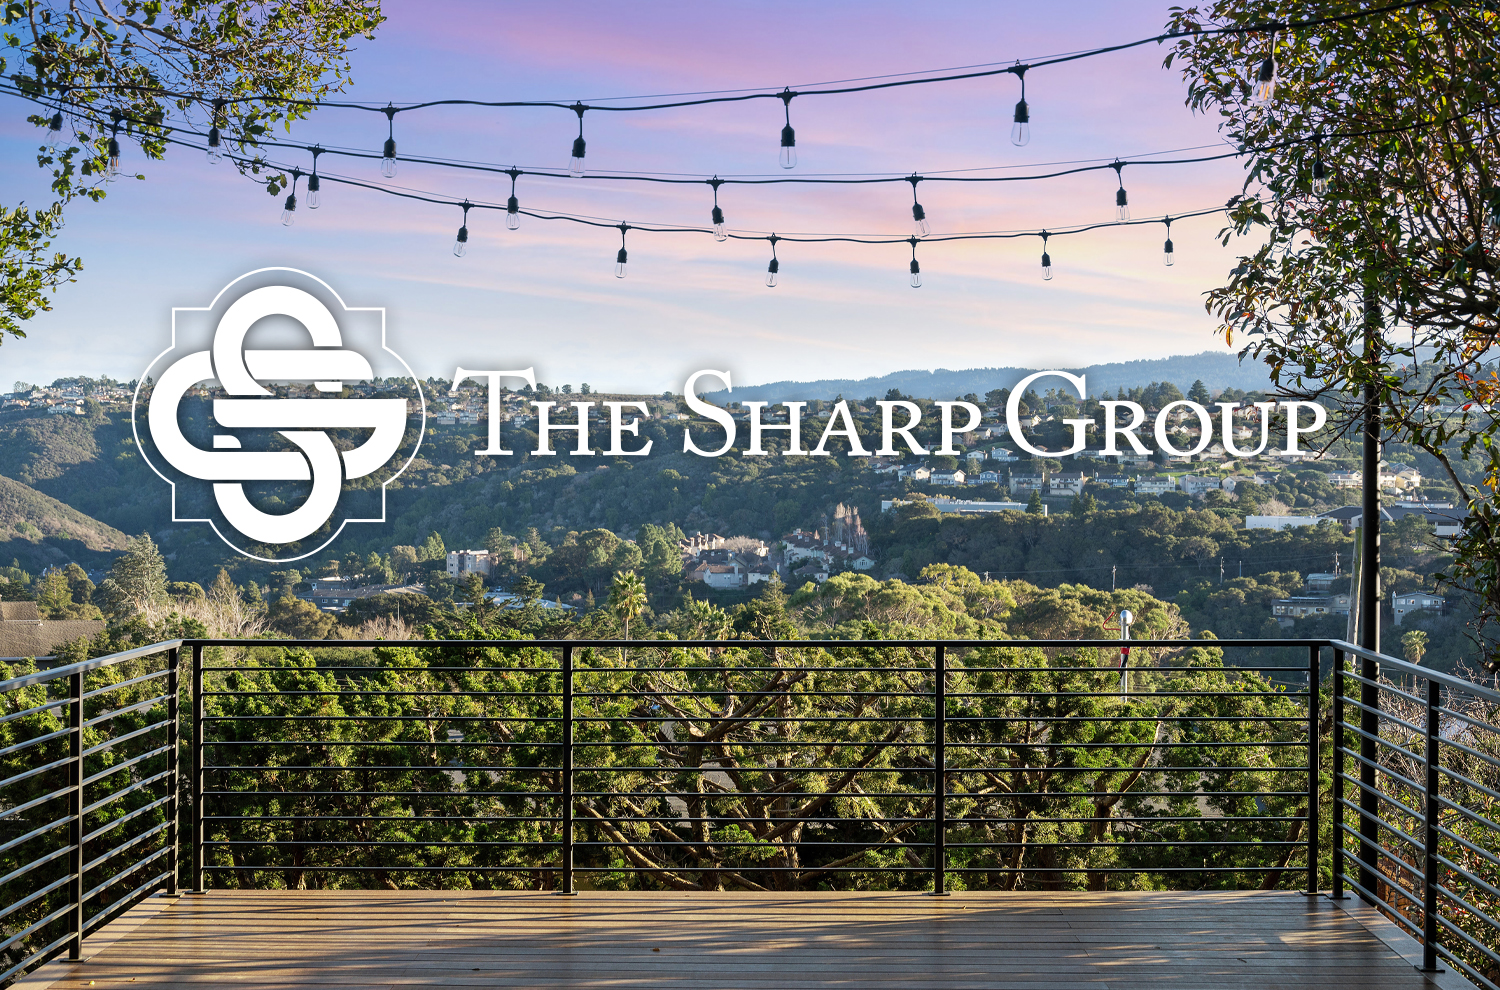 View of Burlingame, CA with The Sharp Group logo